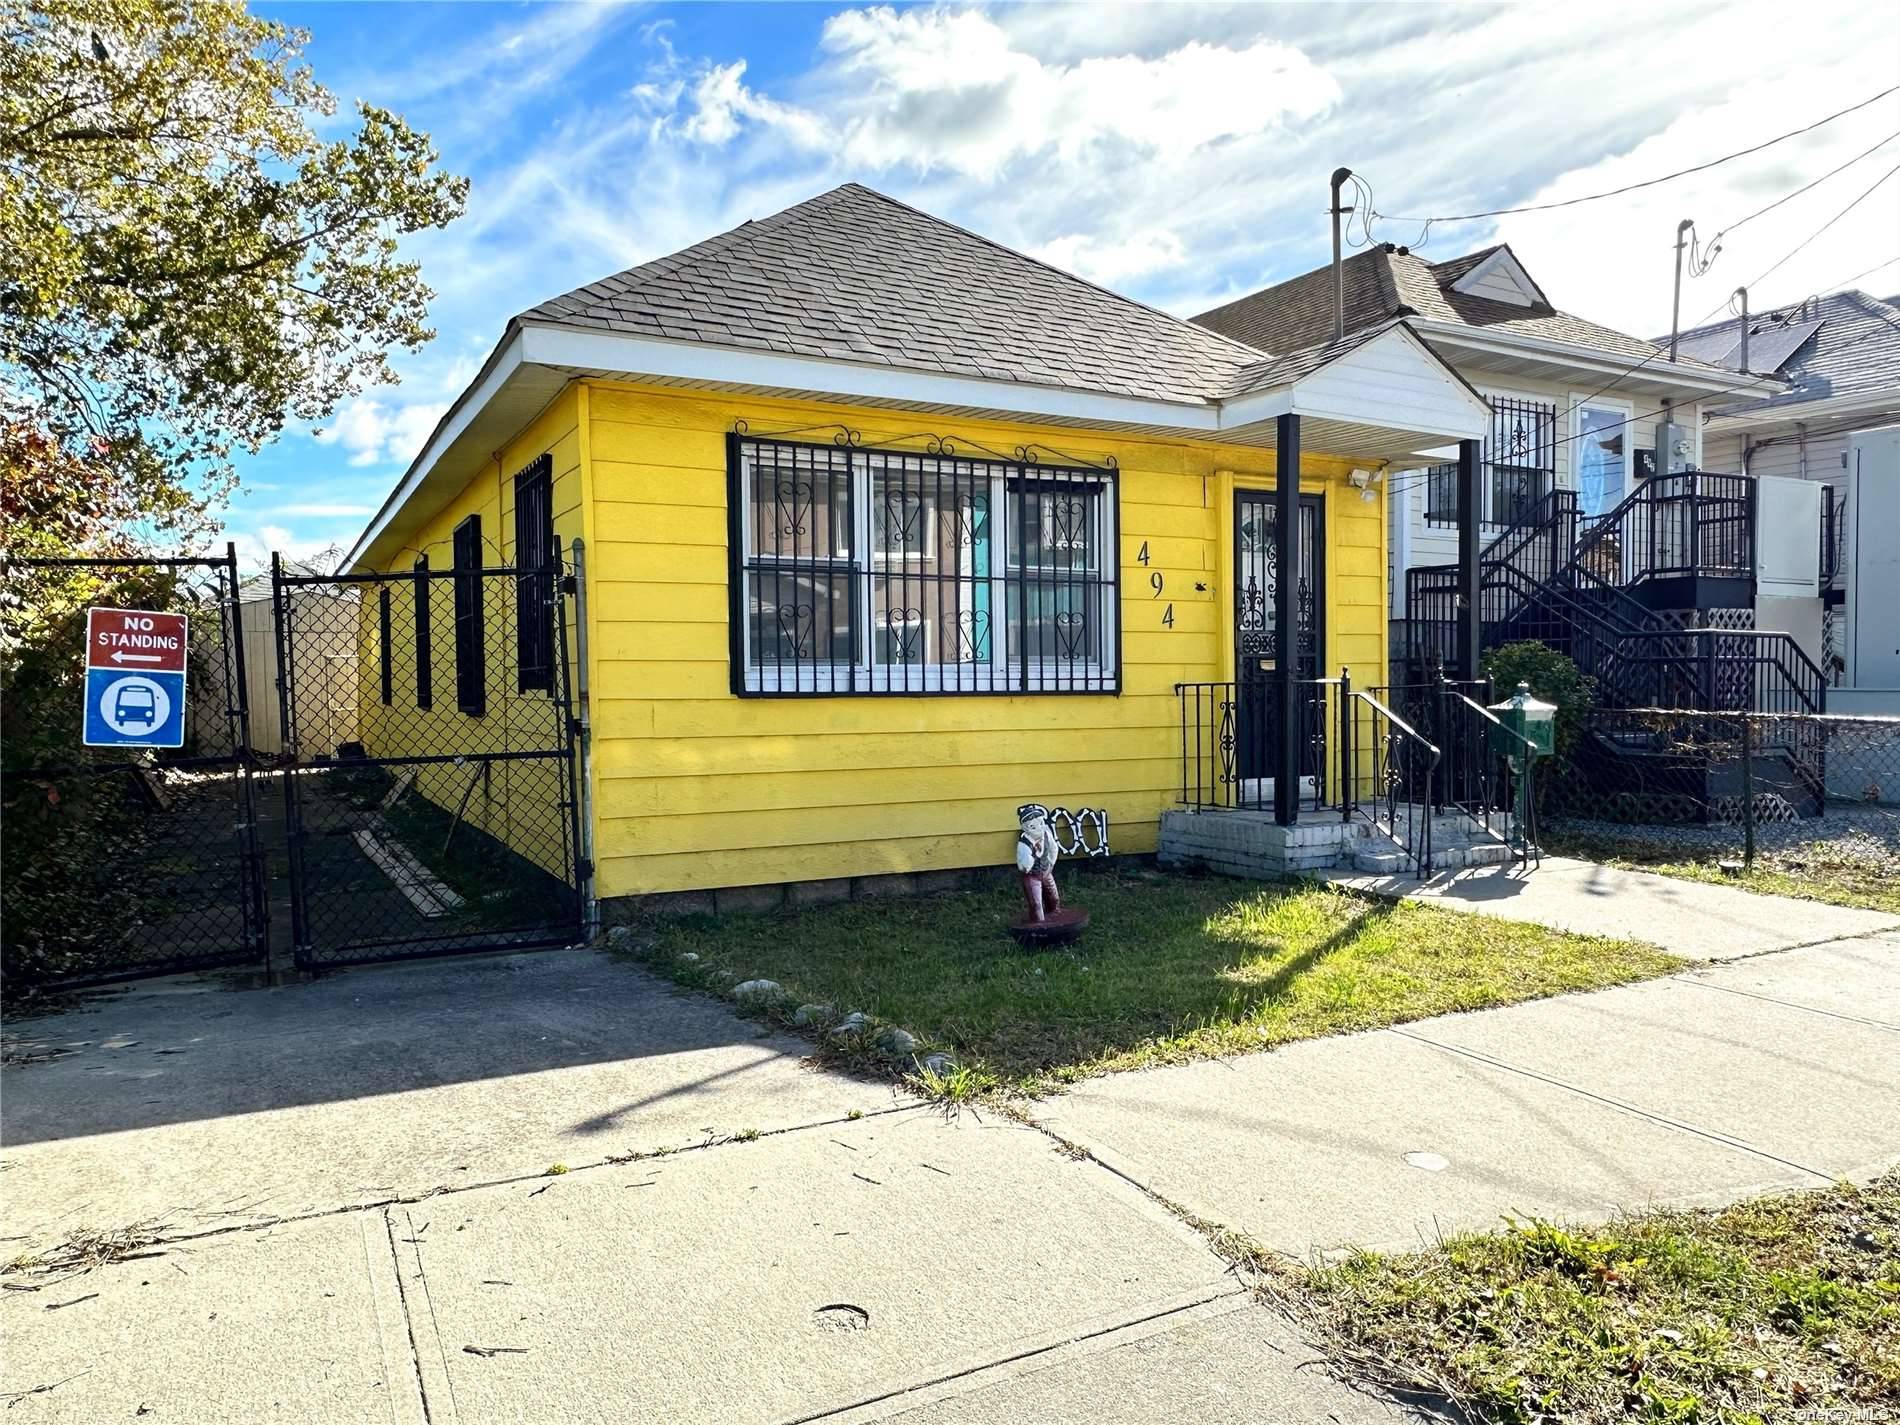 Discover the perfect blend of classic charm and modern sustainability in this inviting bungalow nestled in the heart of Far Rockaway.